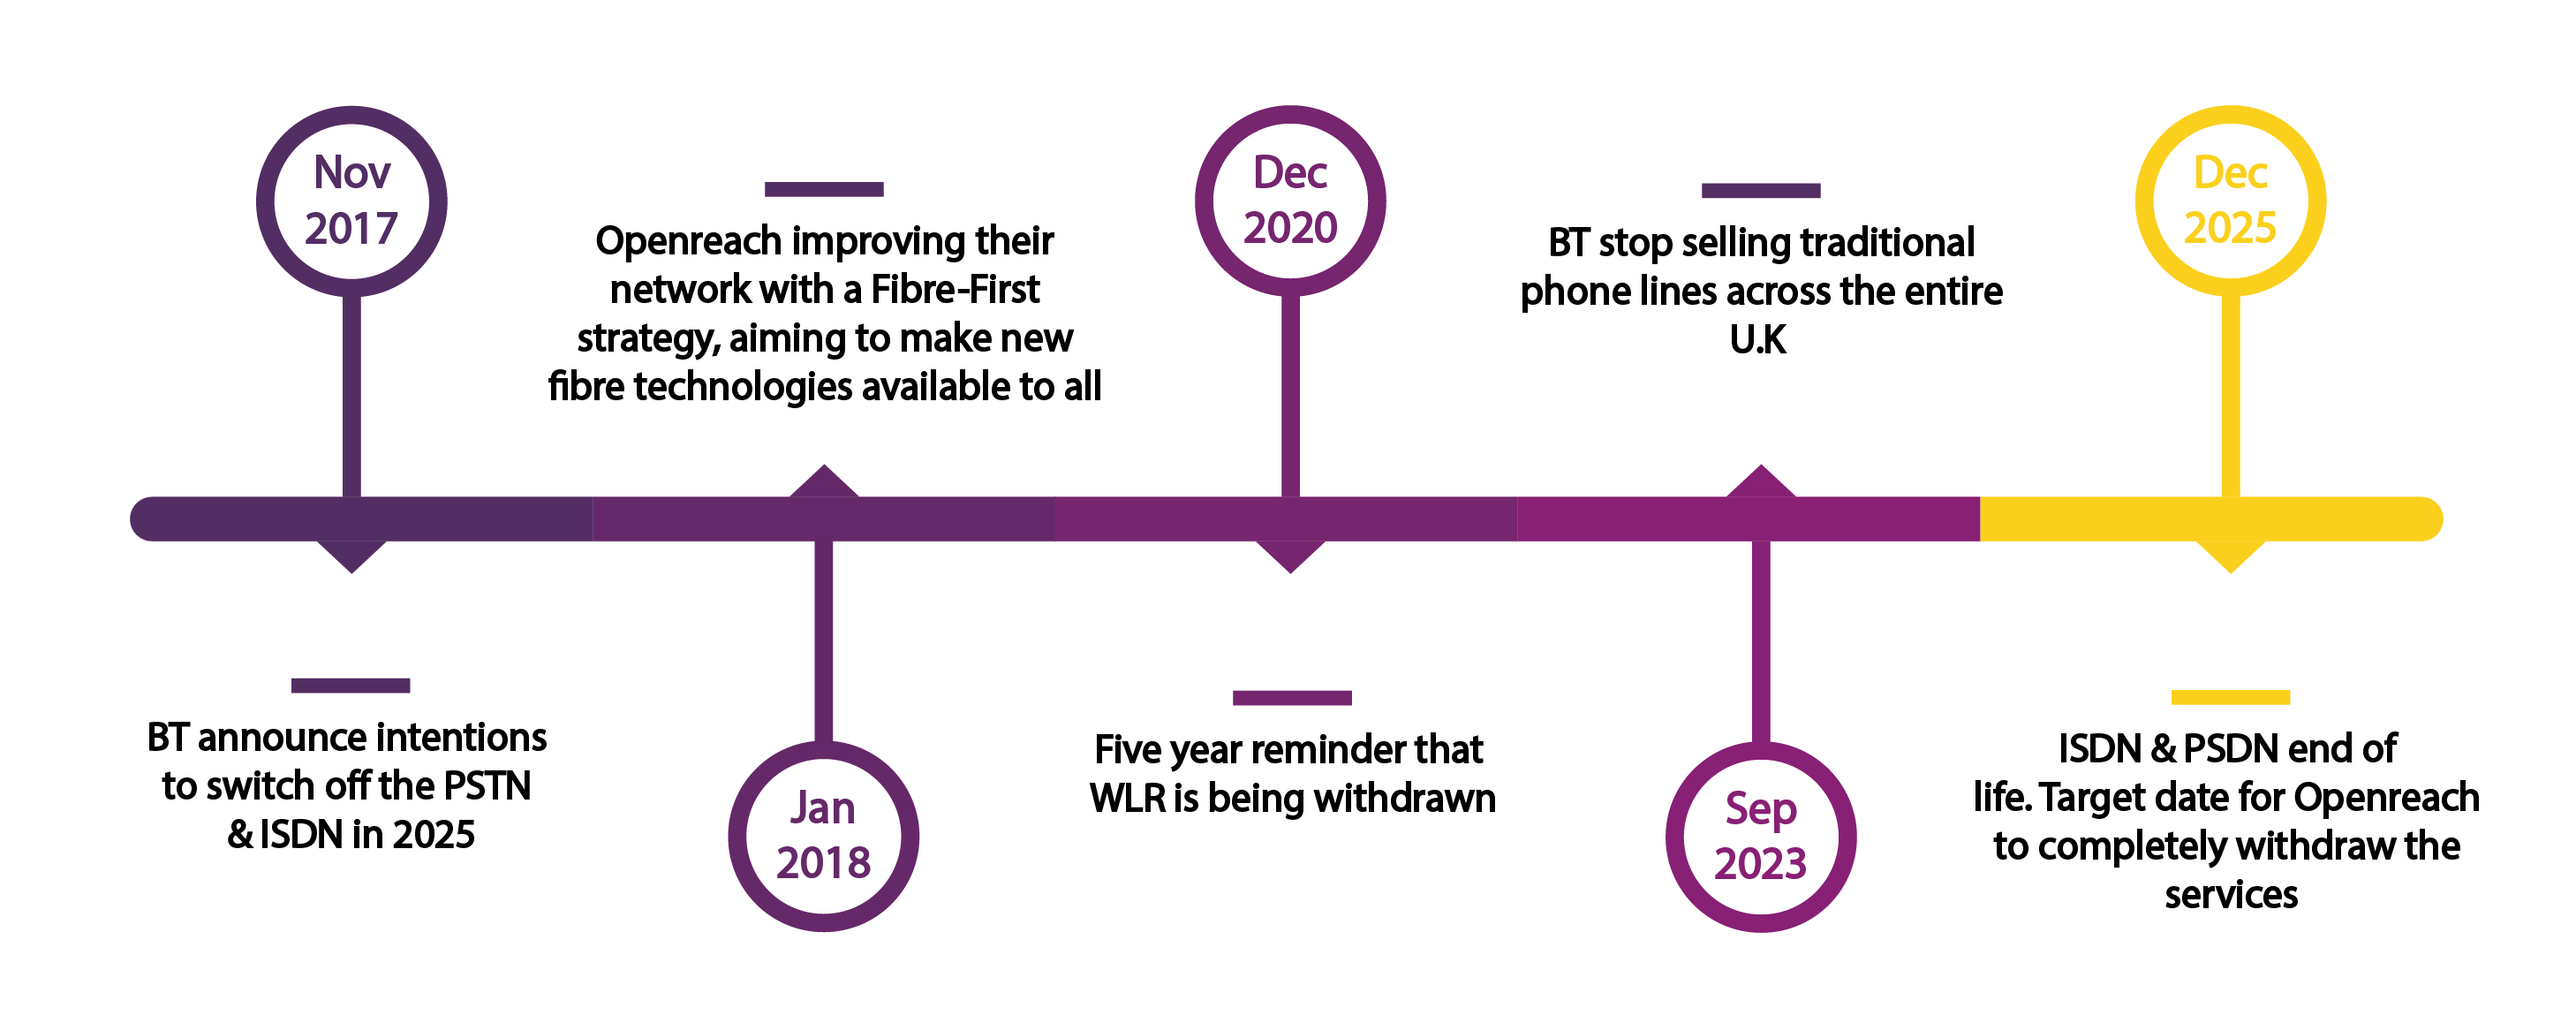 Timeline indicating BT's plans for the PSTN switch-off